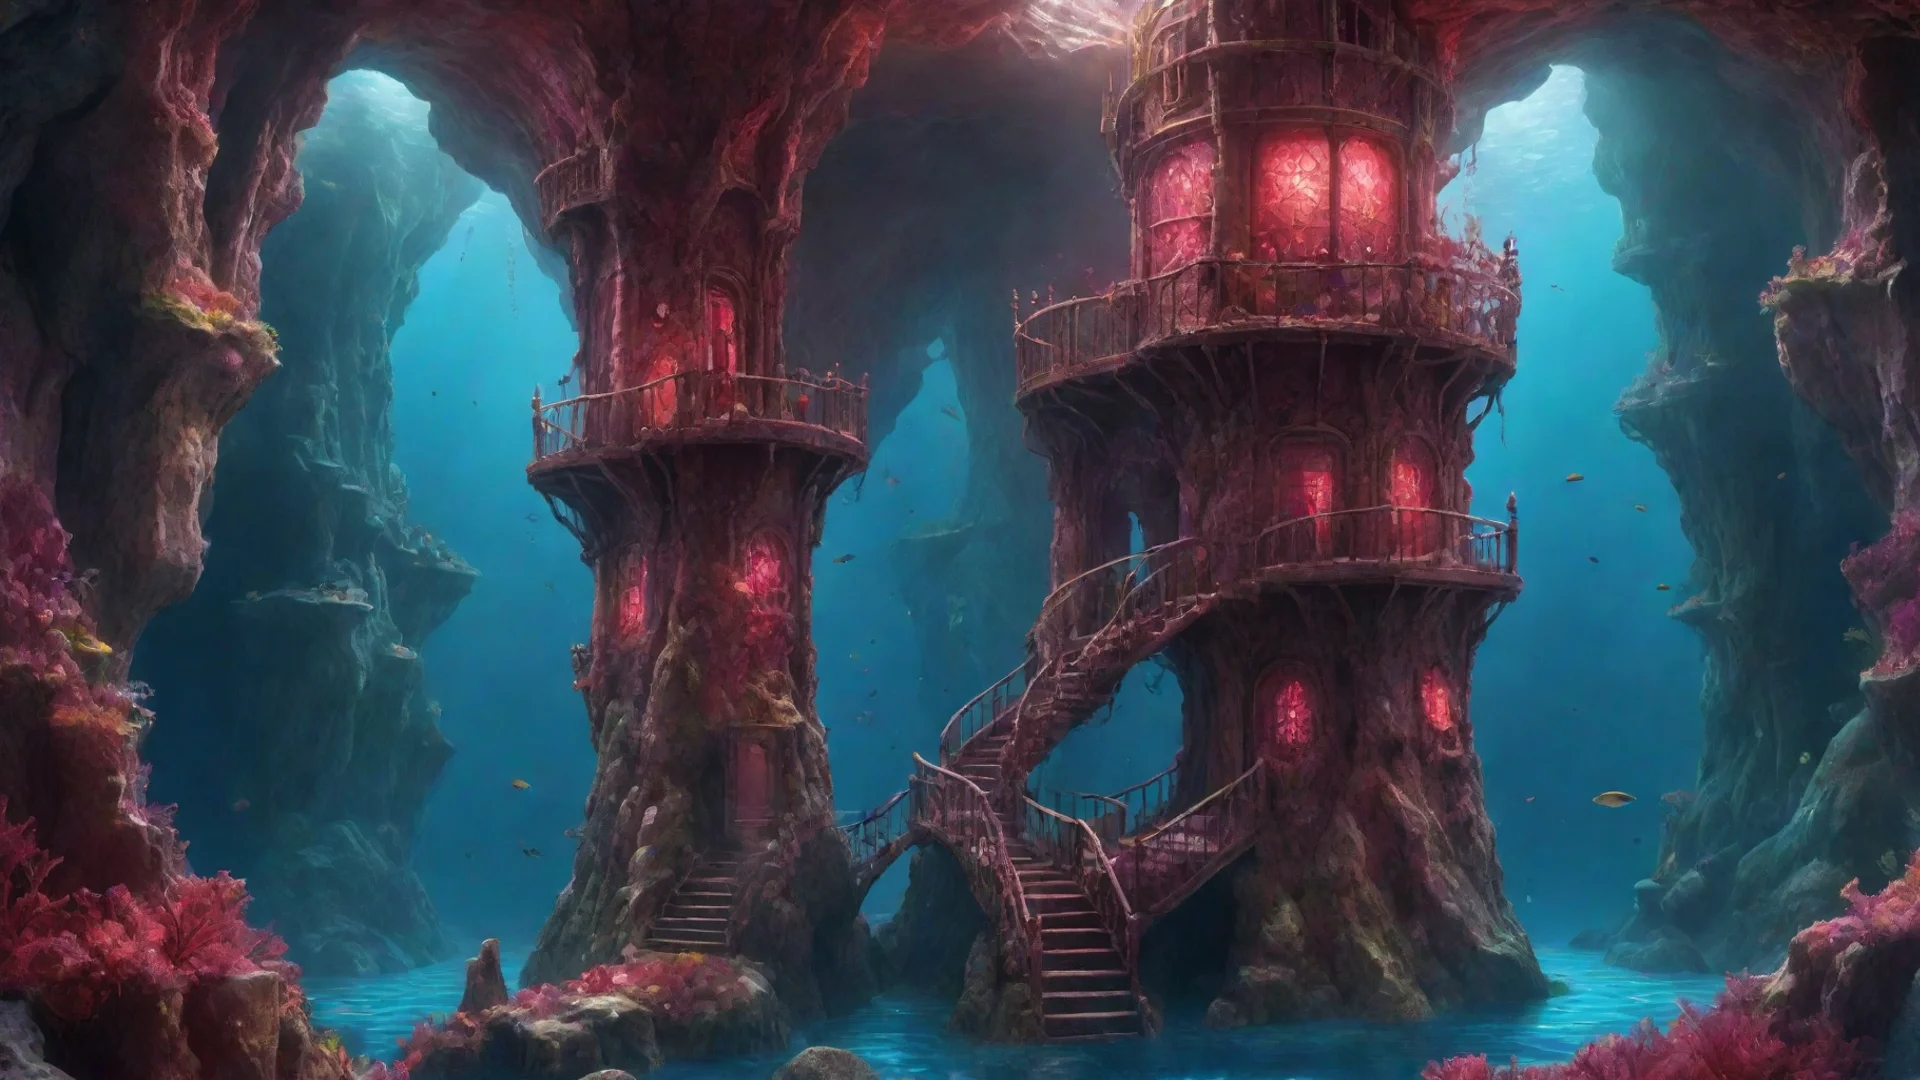 aiamazing magnificent fantasy watch tower inside ruby crystal in an undersea subterranean landscape highly detailed intricate octa awesome portrait 2 wide